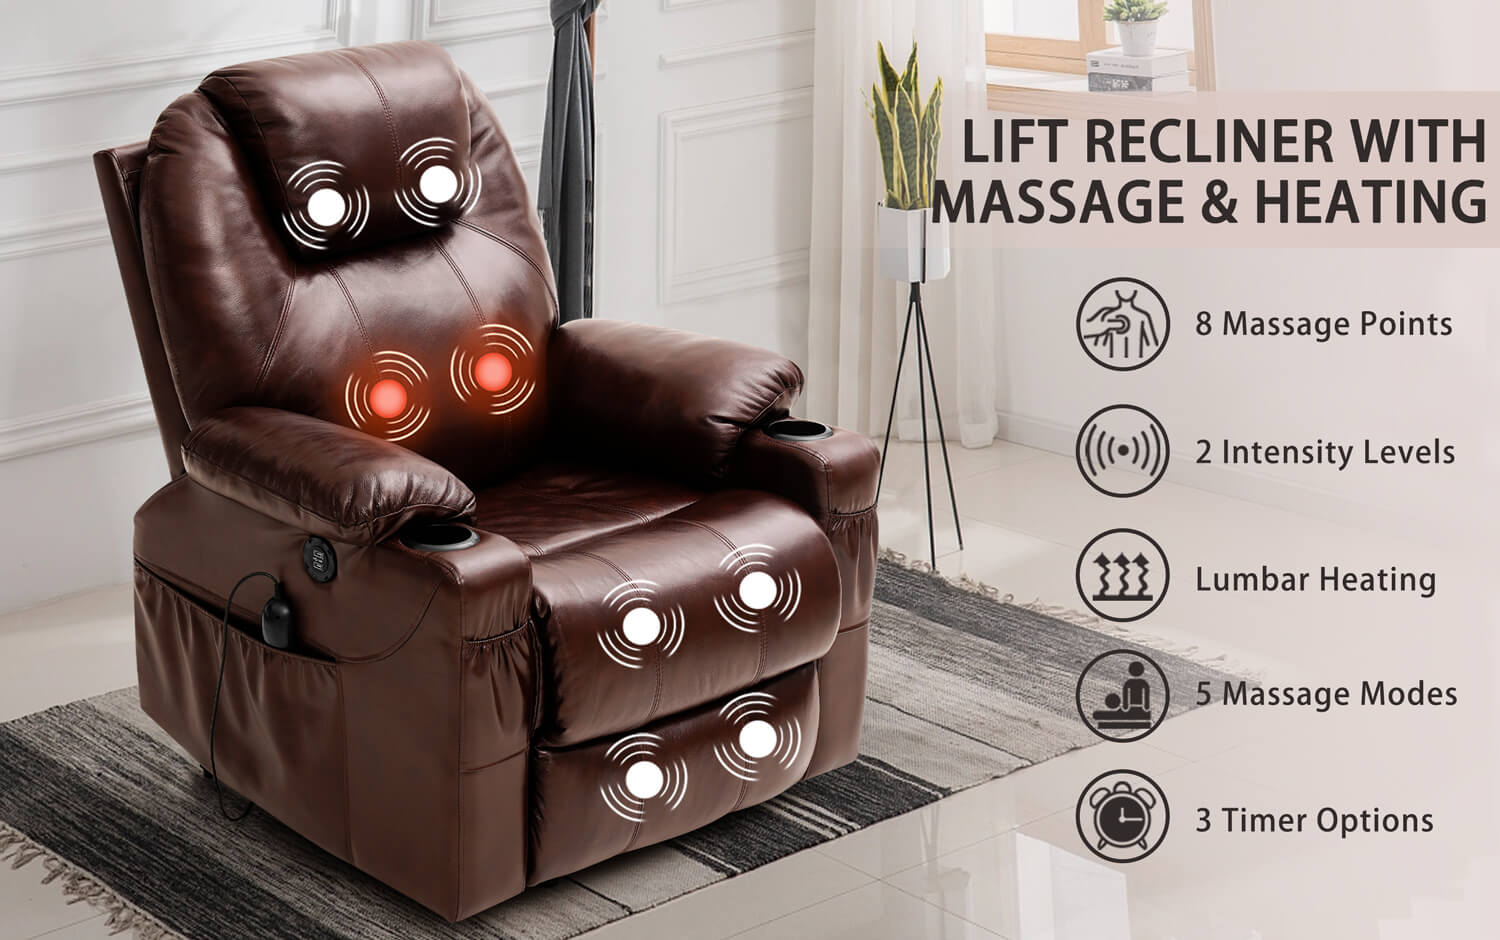 Soulout lift recliner chair for elderly